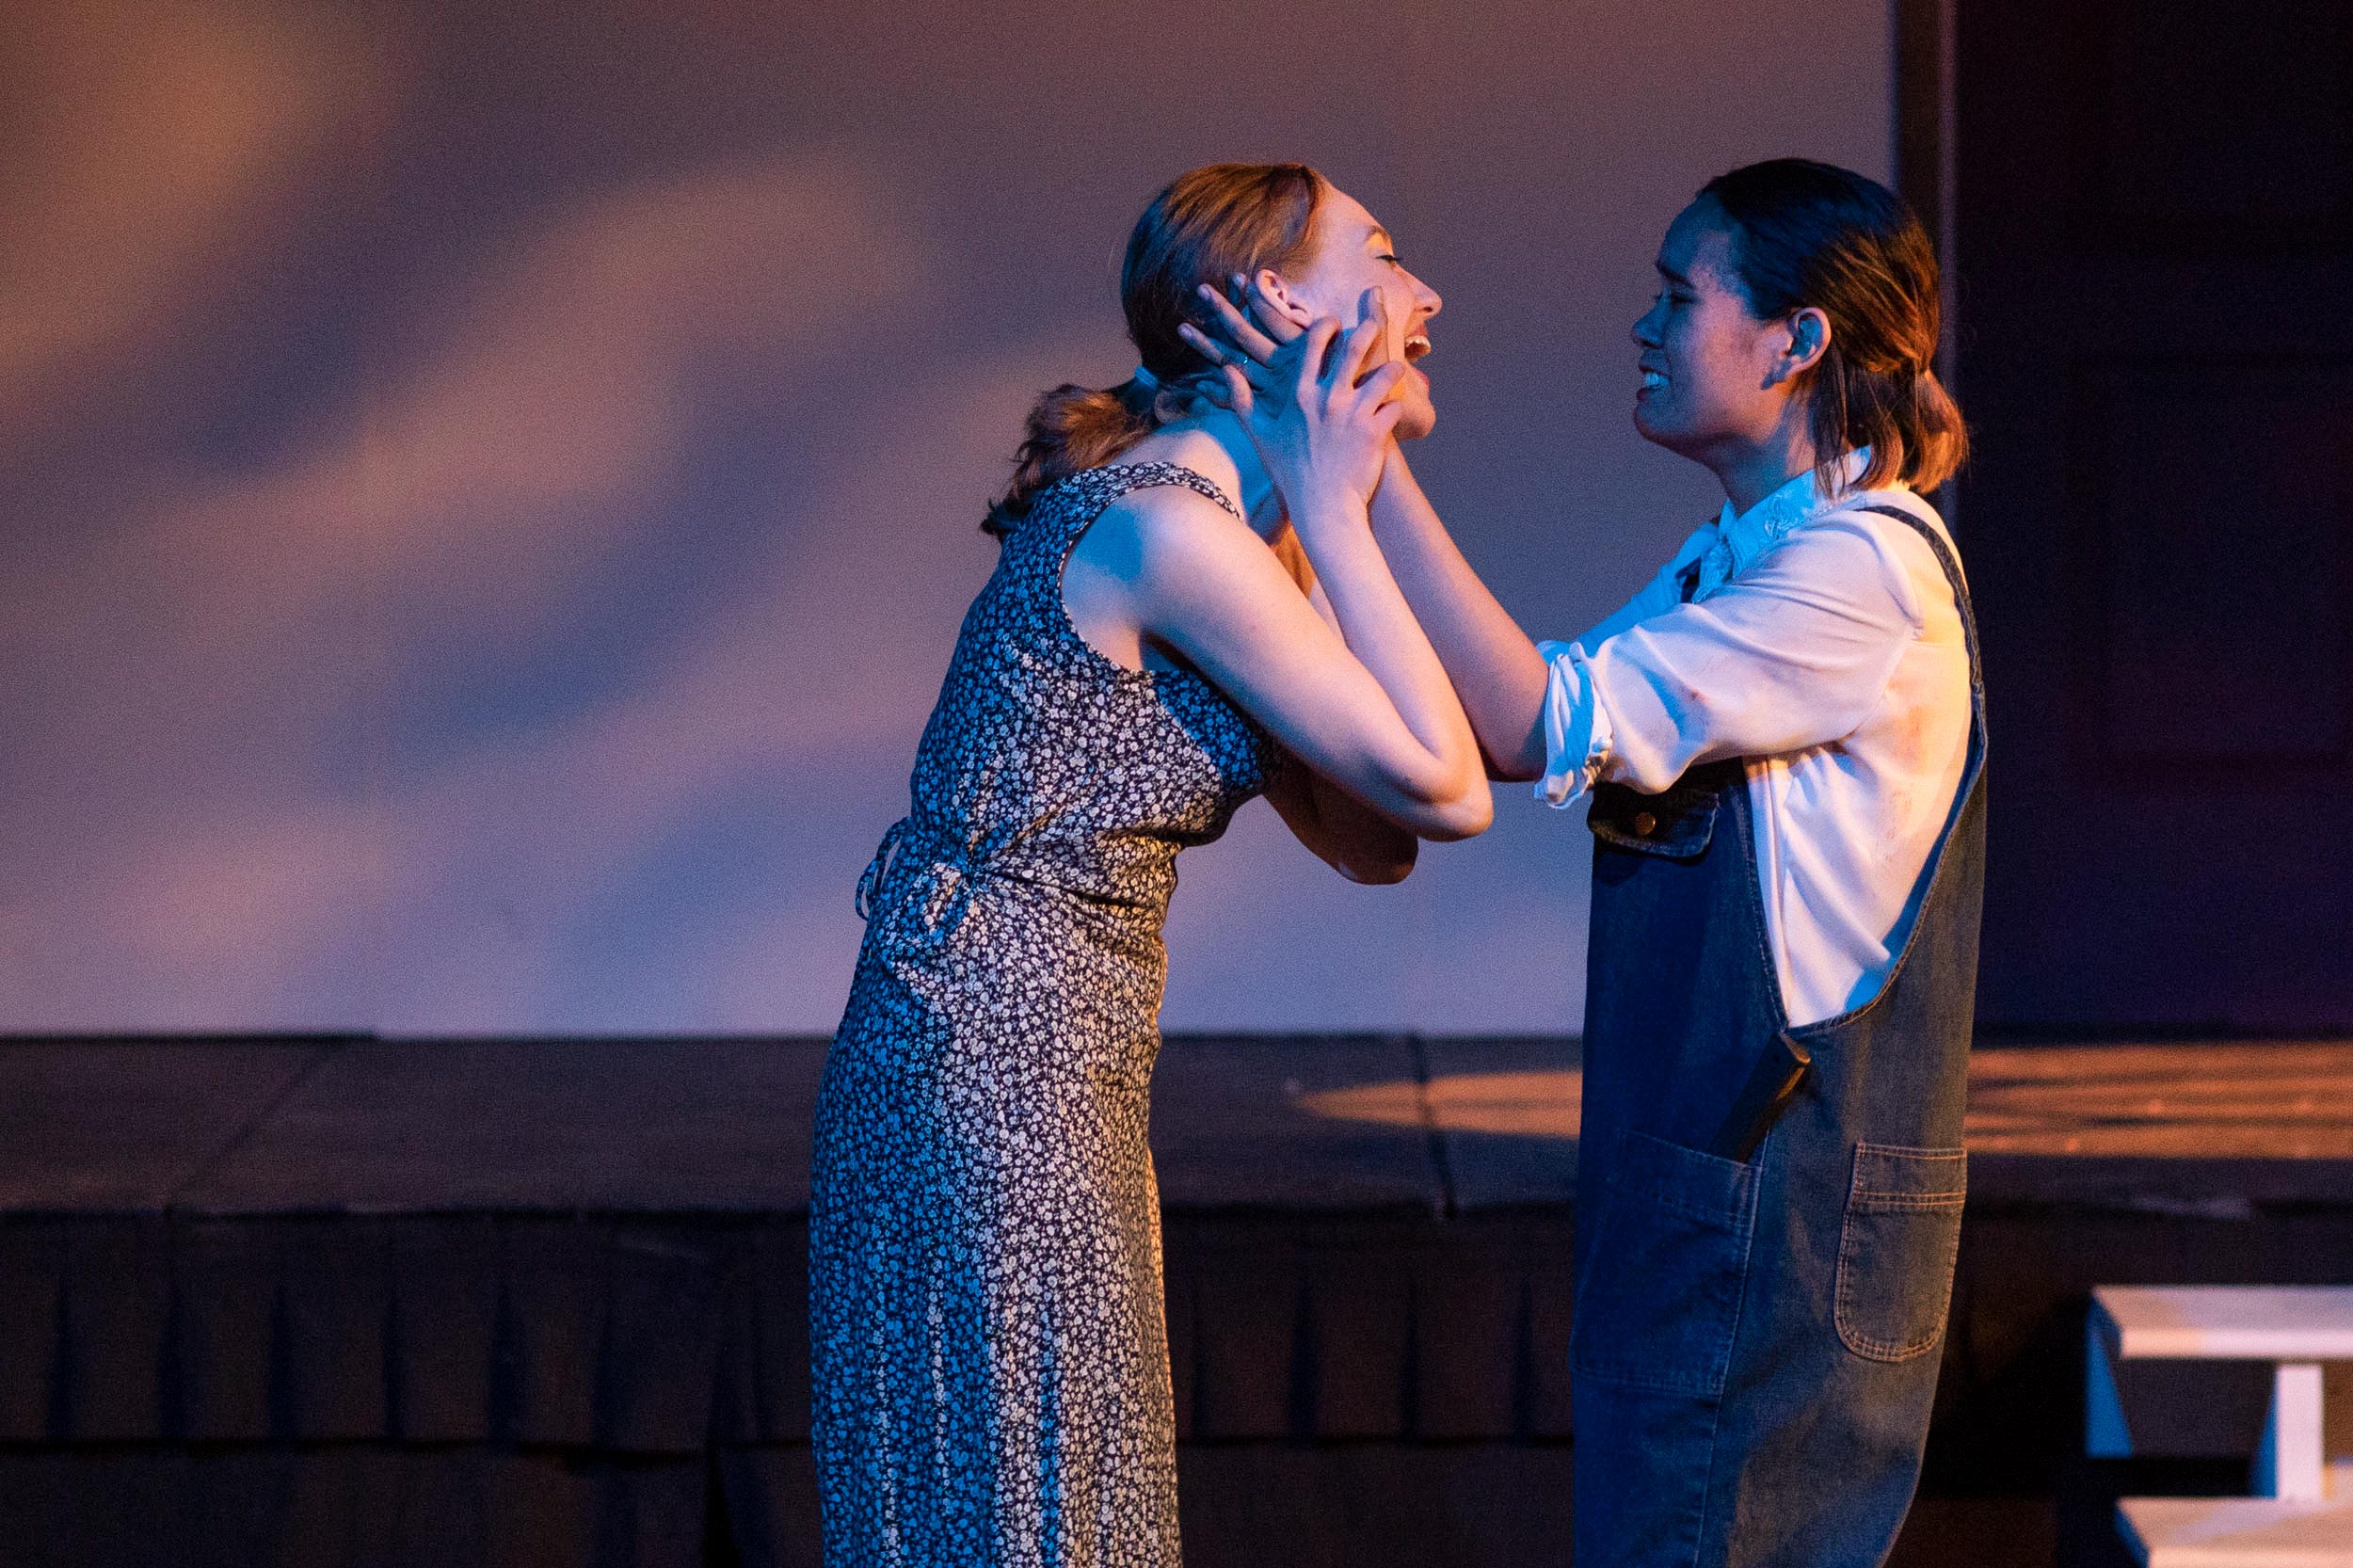 Kim Salac, right, and Maille-Rose Smith, left acting in the play Macbeth